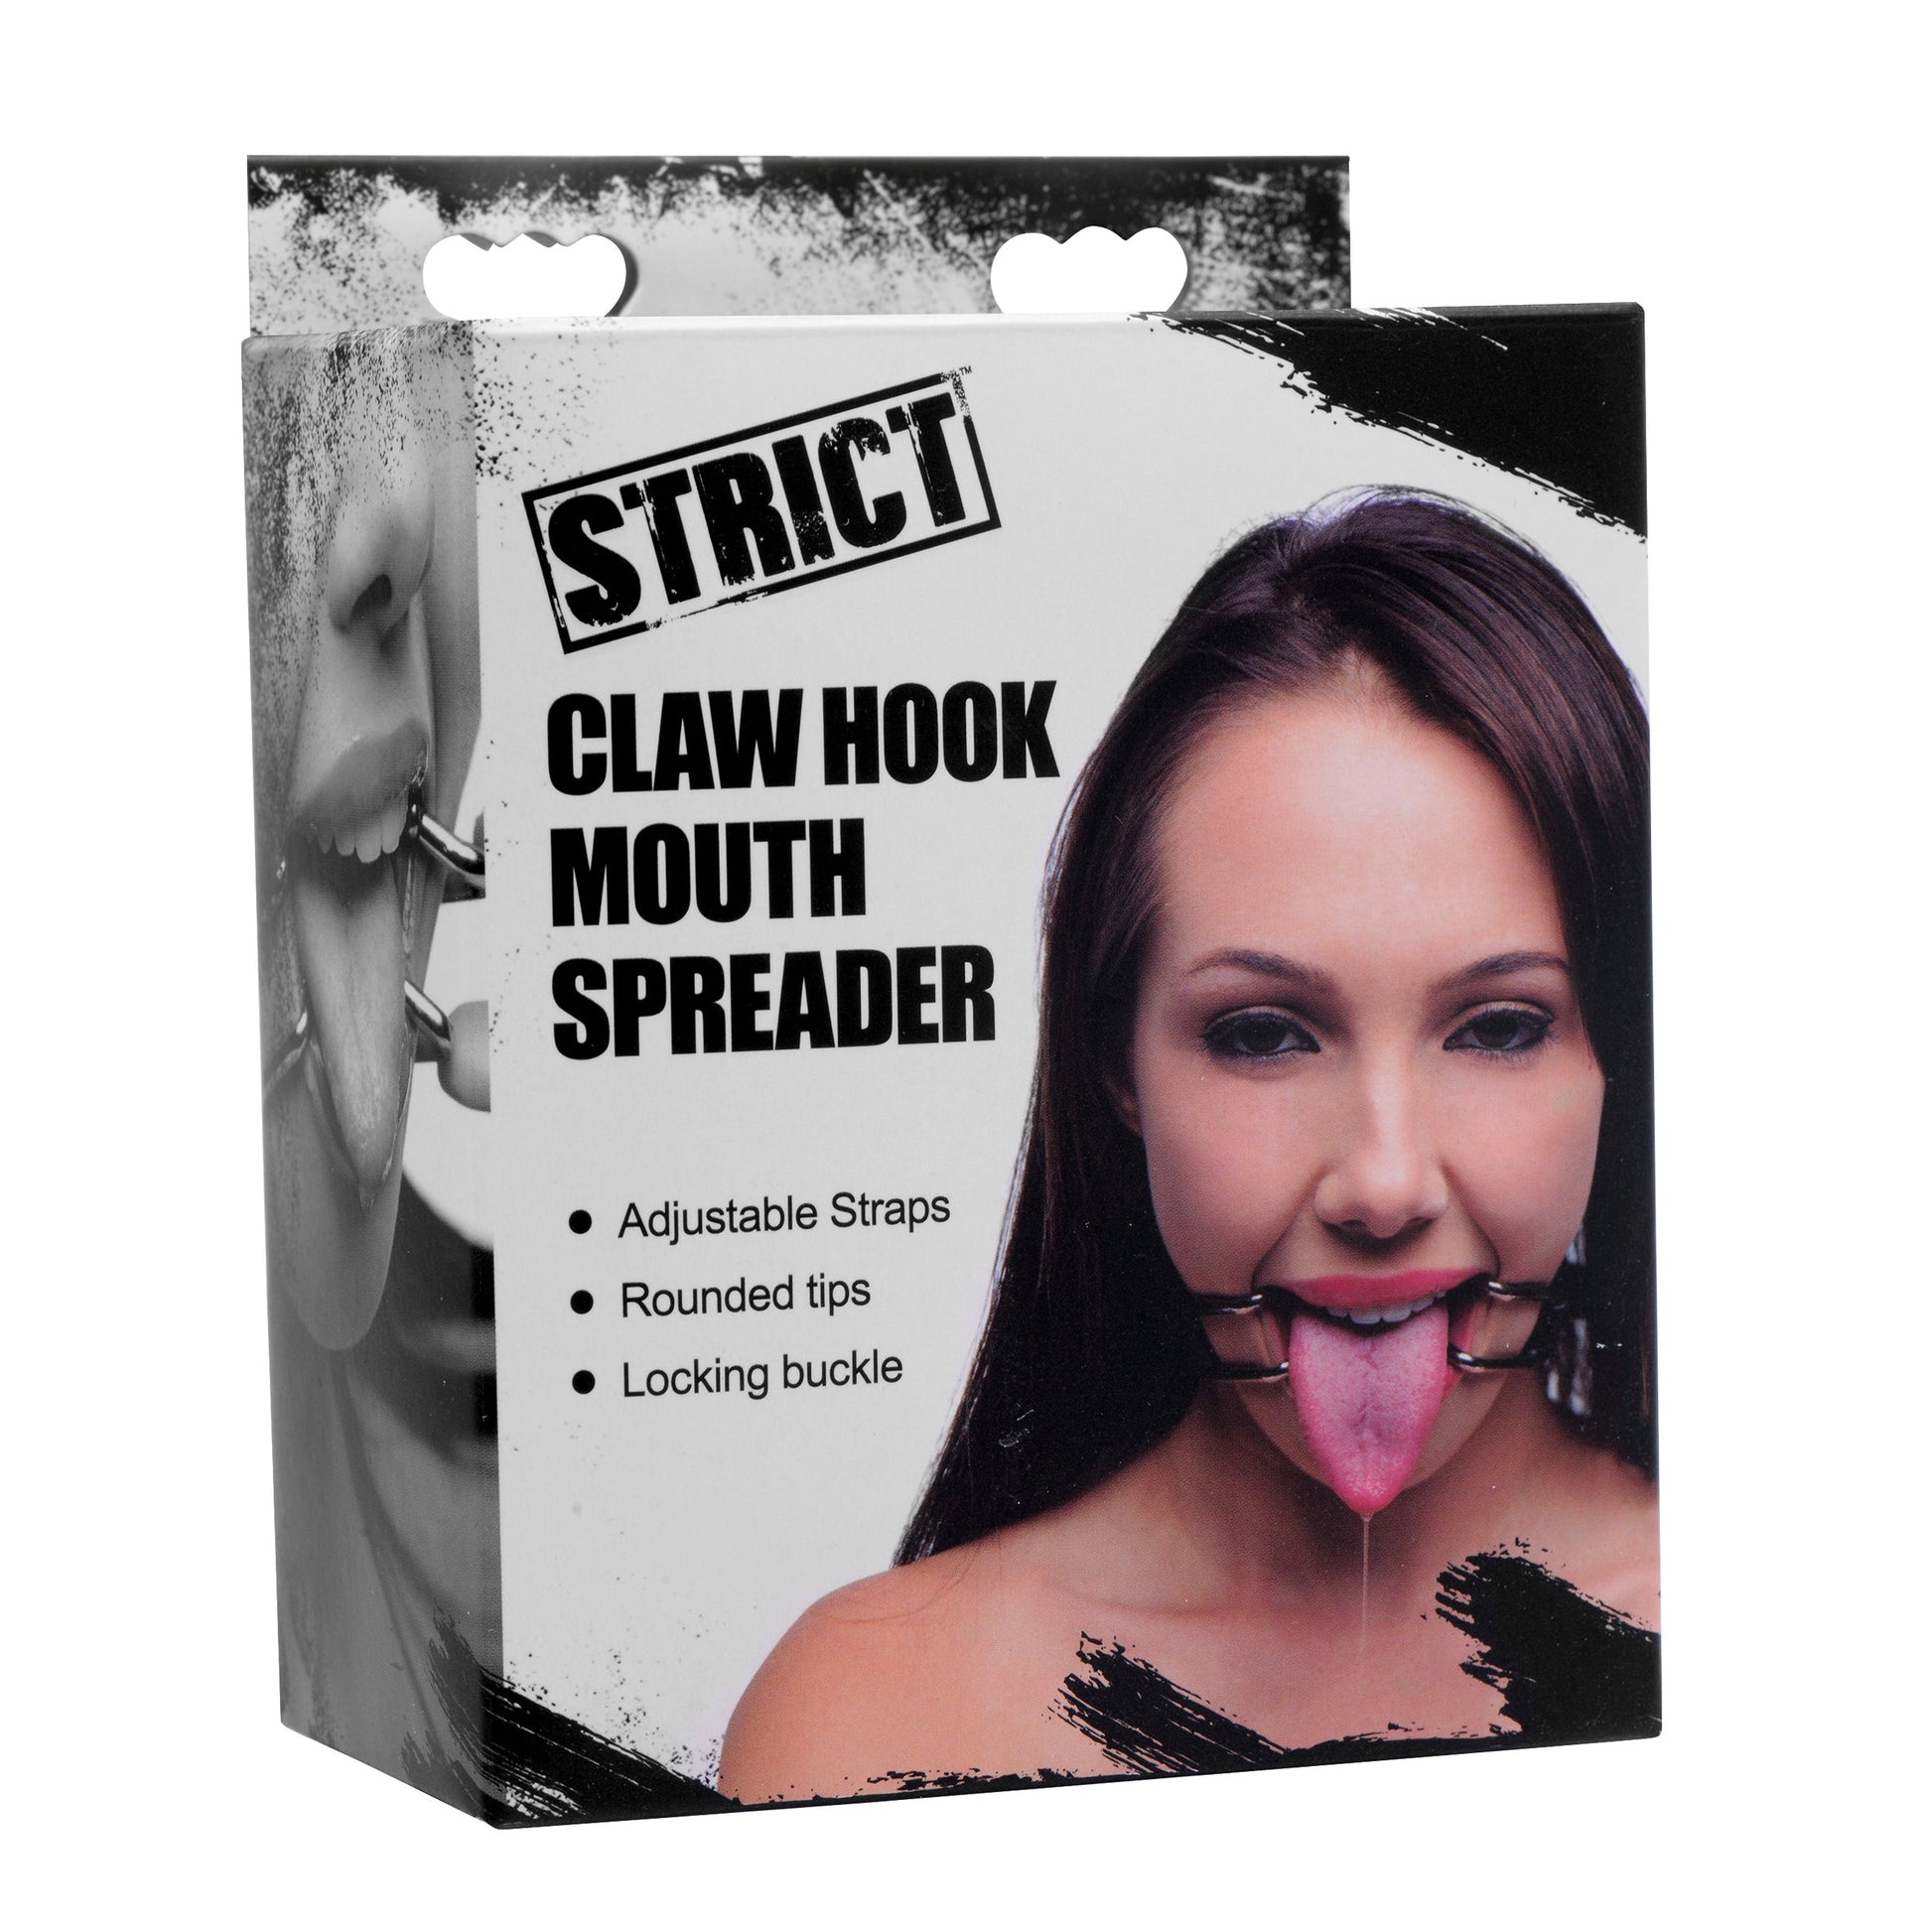 Claw Hook Mouth Spreader